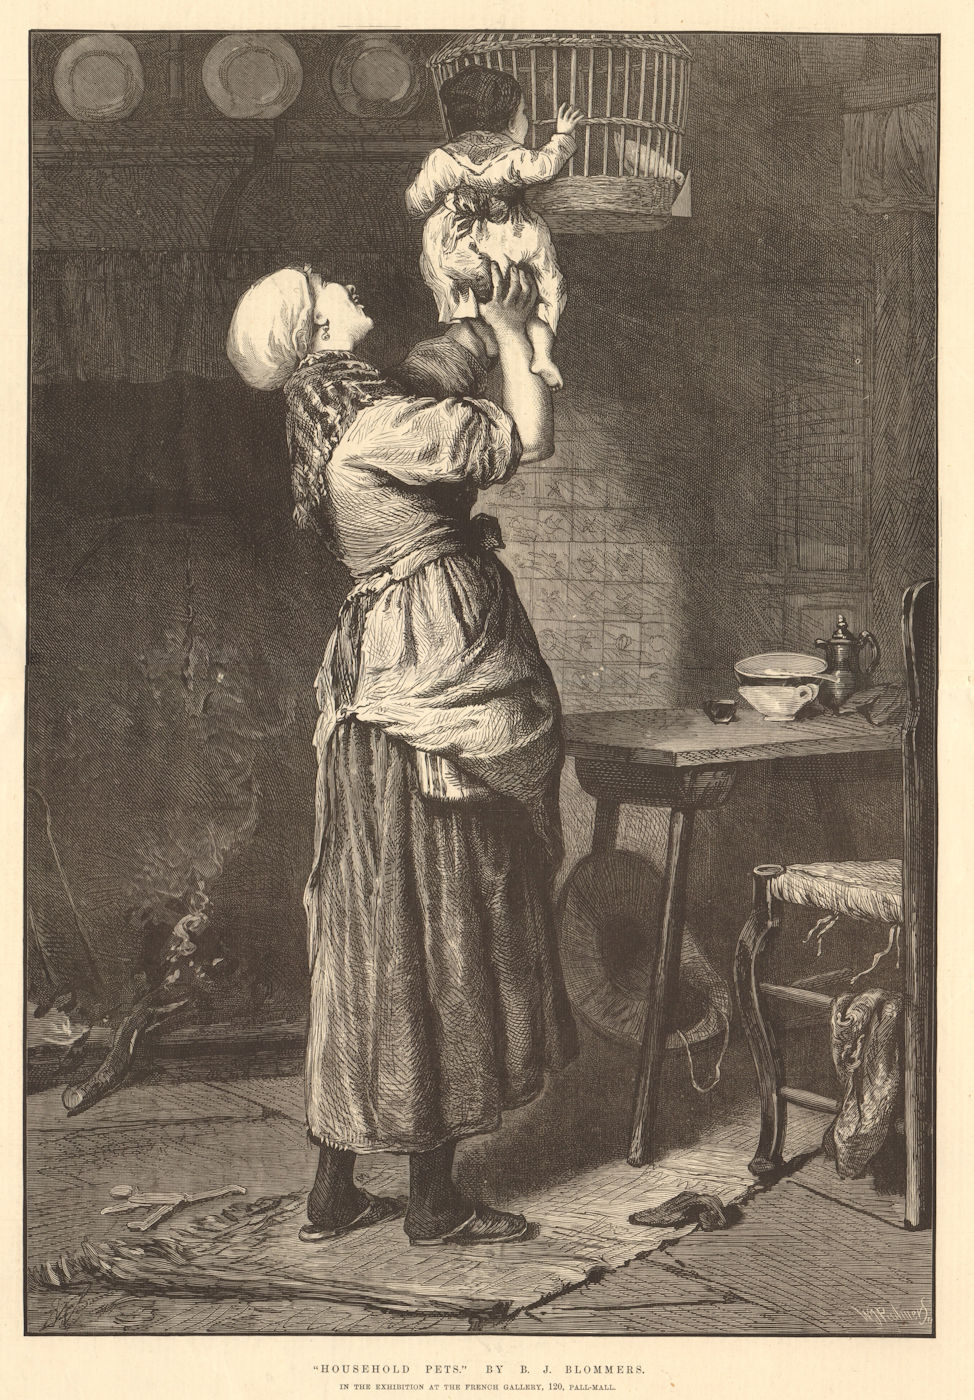 Associate Product "Household pets", by B. J. Bloomers. Birds. Children 1876 ILN full page print